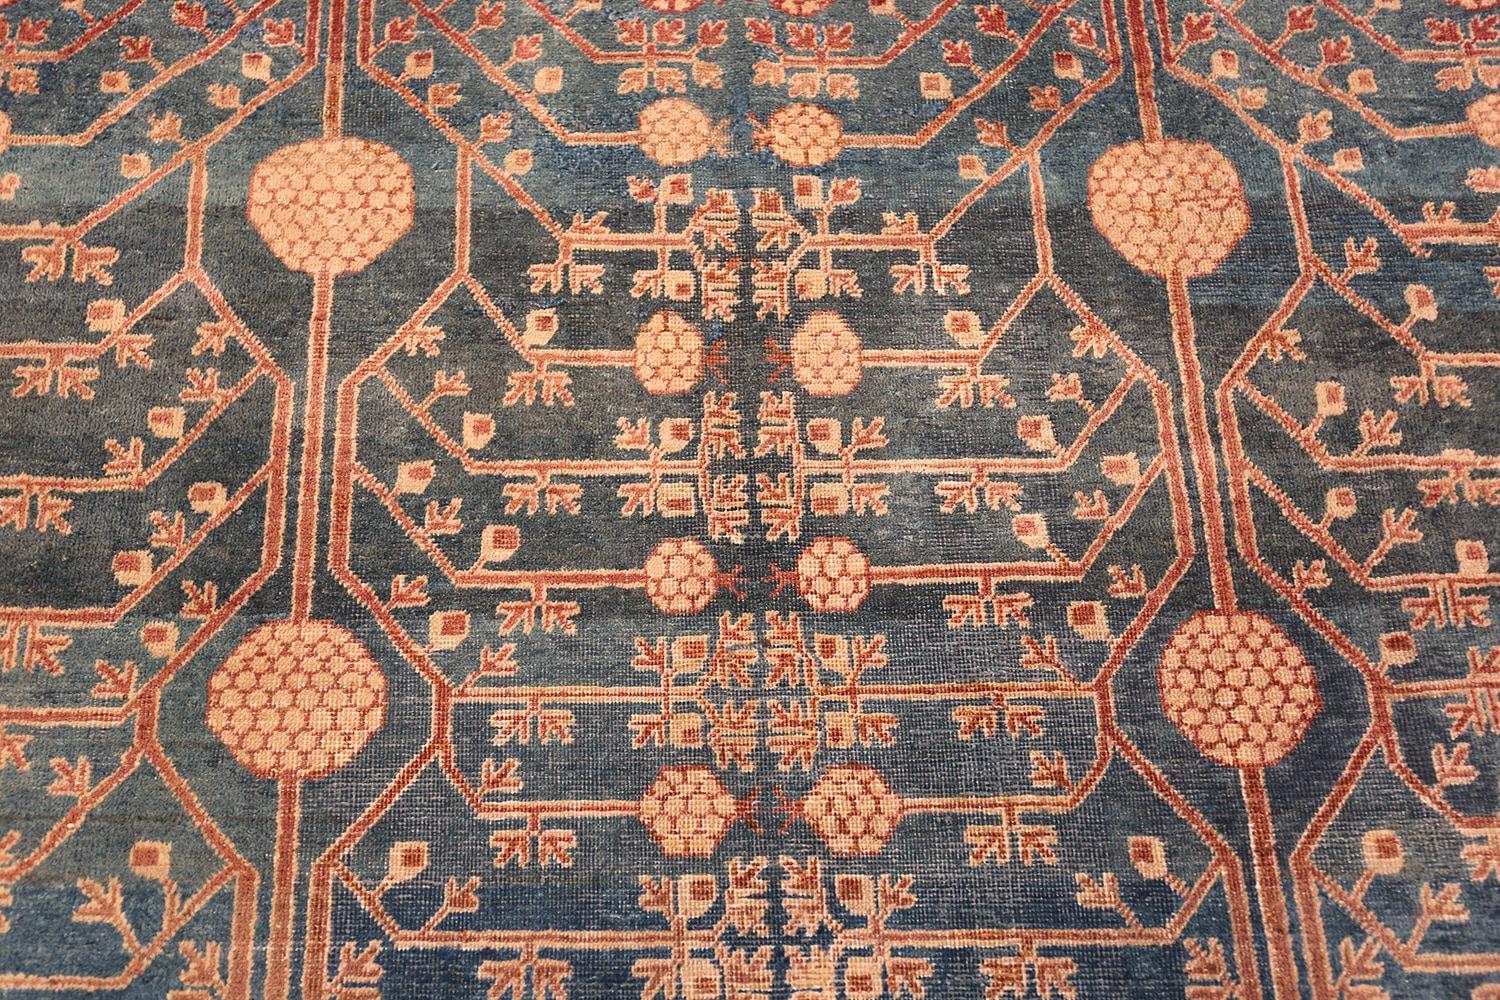 Early 20th Century Tribal Blue Grey Antique Pomegranate Khotan Rug. Size: 6 ft 2 in x 13 ft